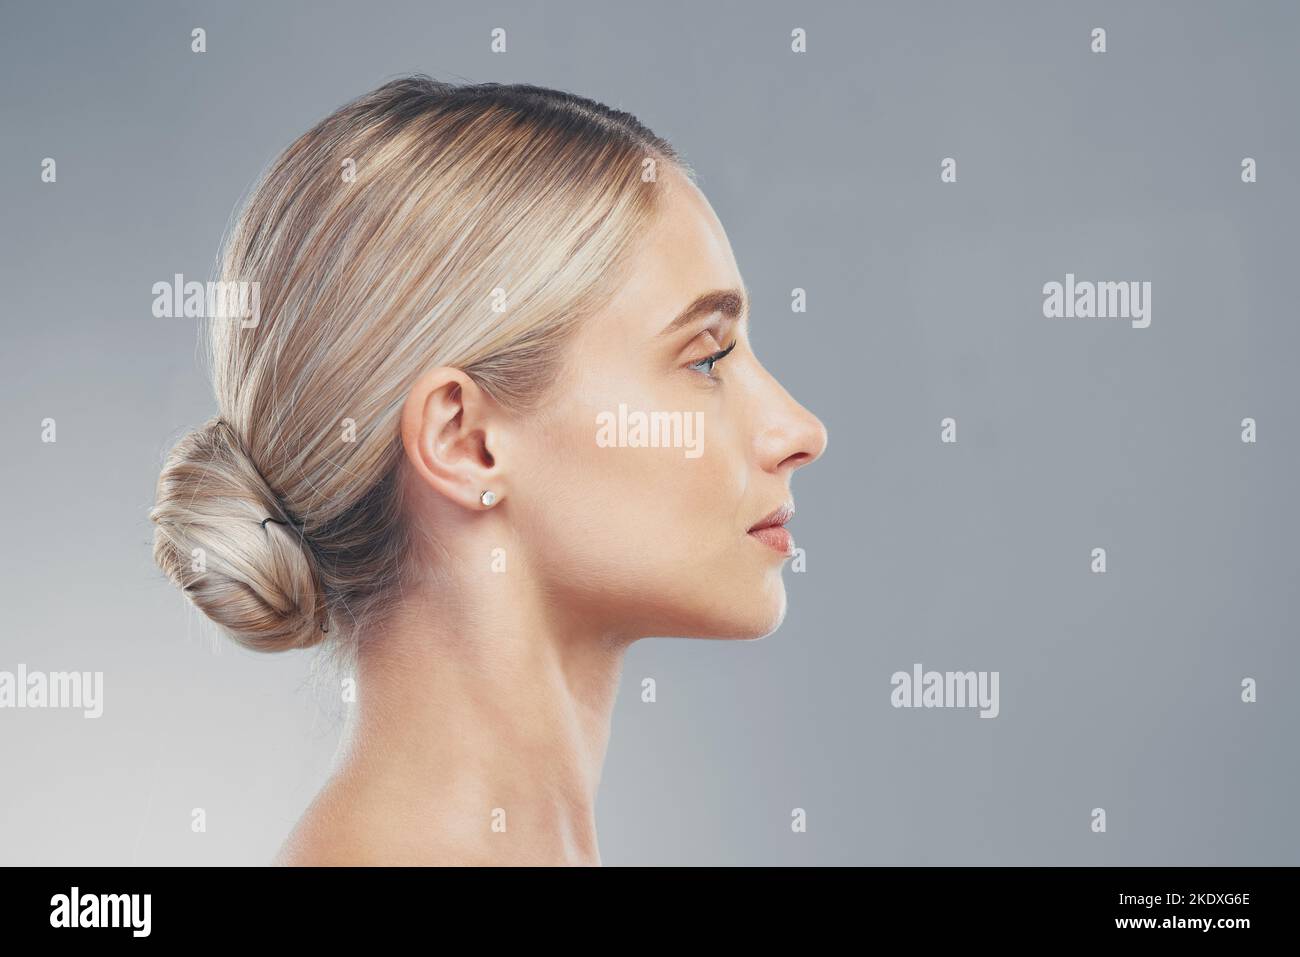 Skincare, profile and side face of a woman for dermatology, wellness and natural beauty against a grey mockup studio background. Advertising Stock Photo